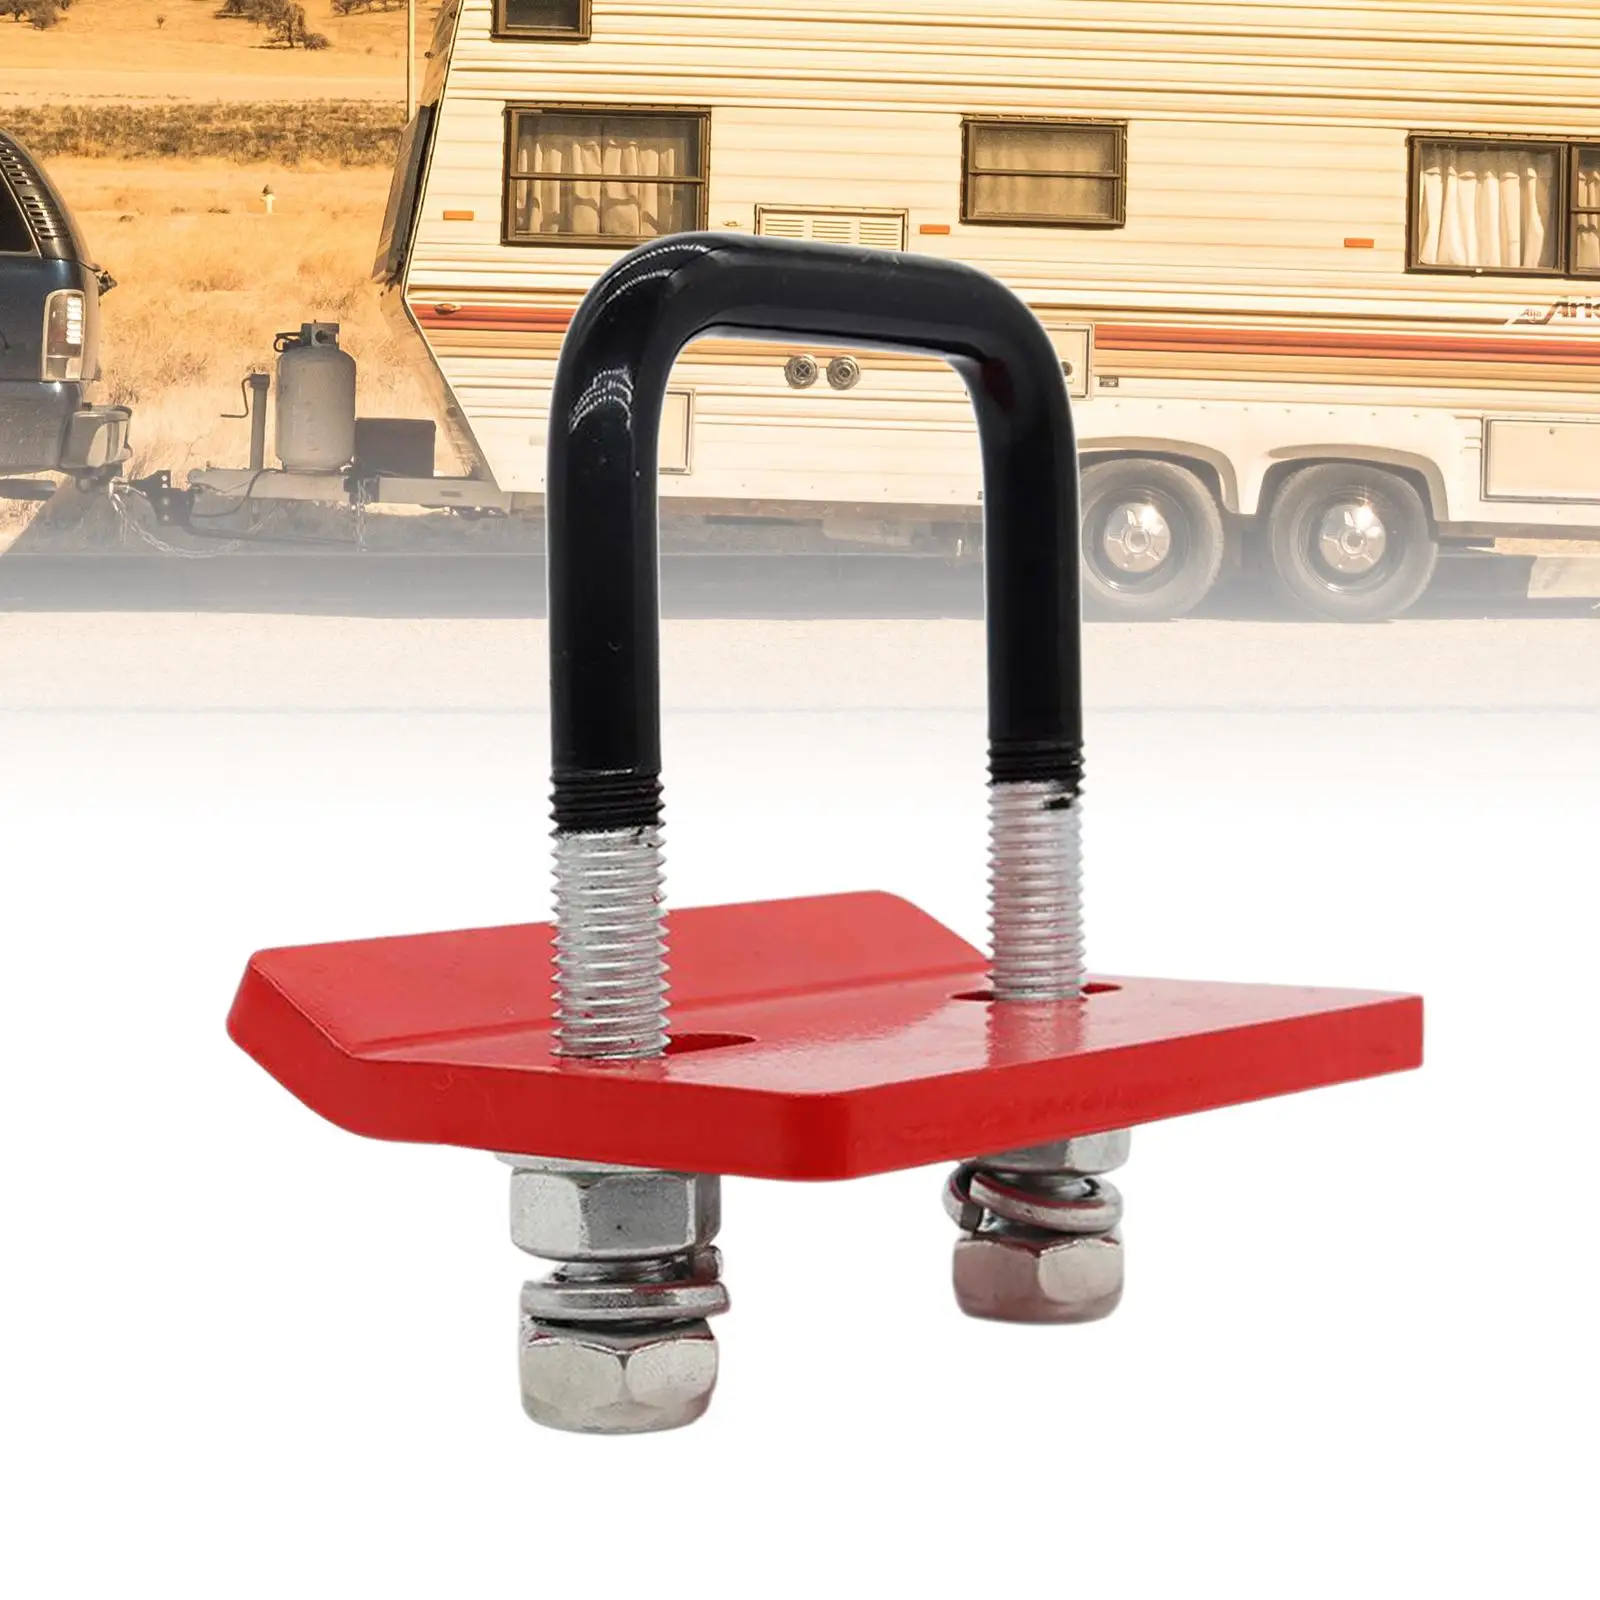 Hitch Tightener Lock Down Tow Clamp for Hitch Tray Bike Rack Boat